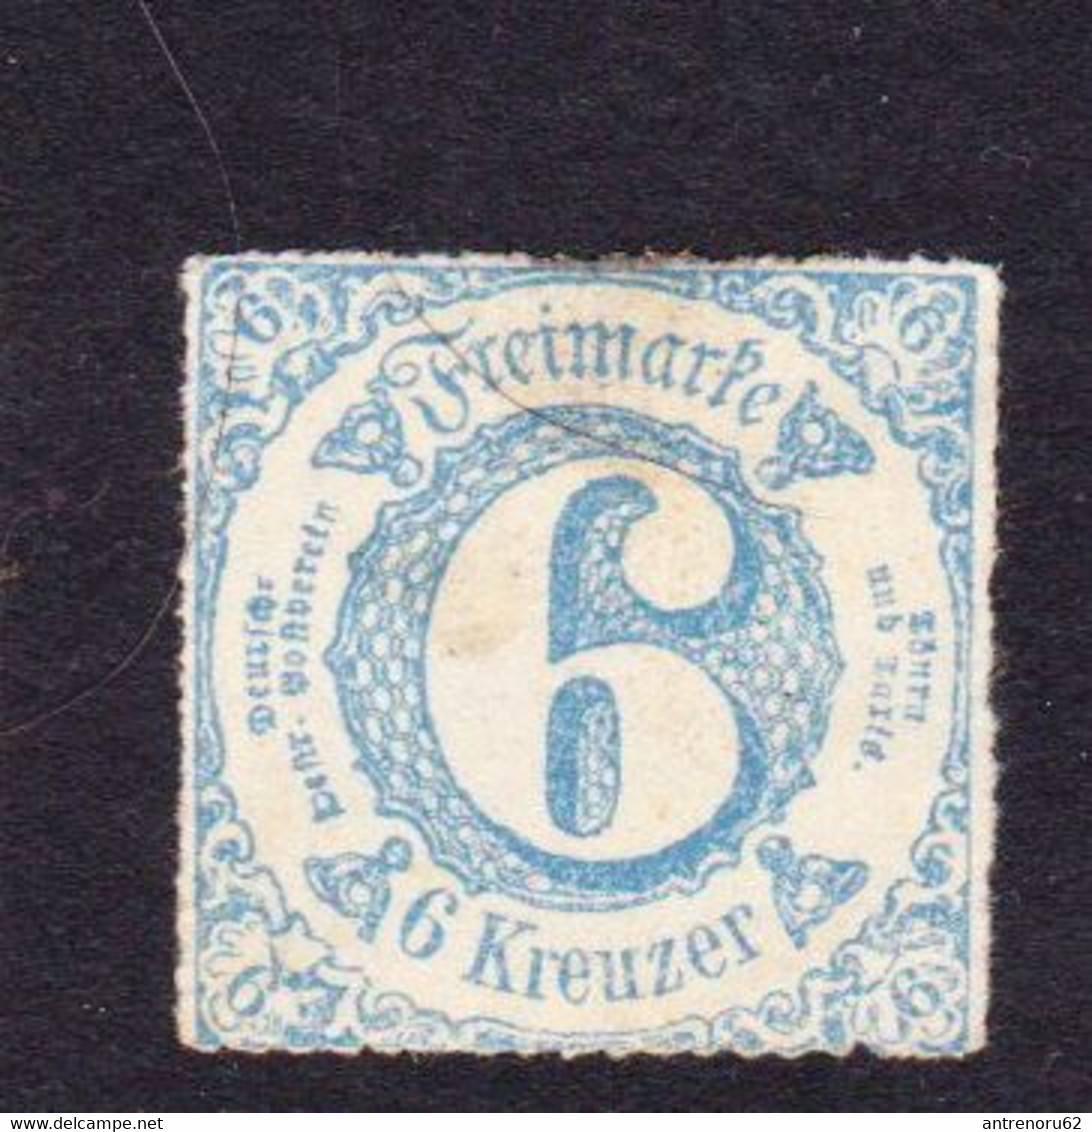 STAMPS-THURN-AND-TAXIS-1865-UNUSED-MH*-SEE-SCAN - Nuovi